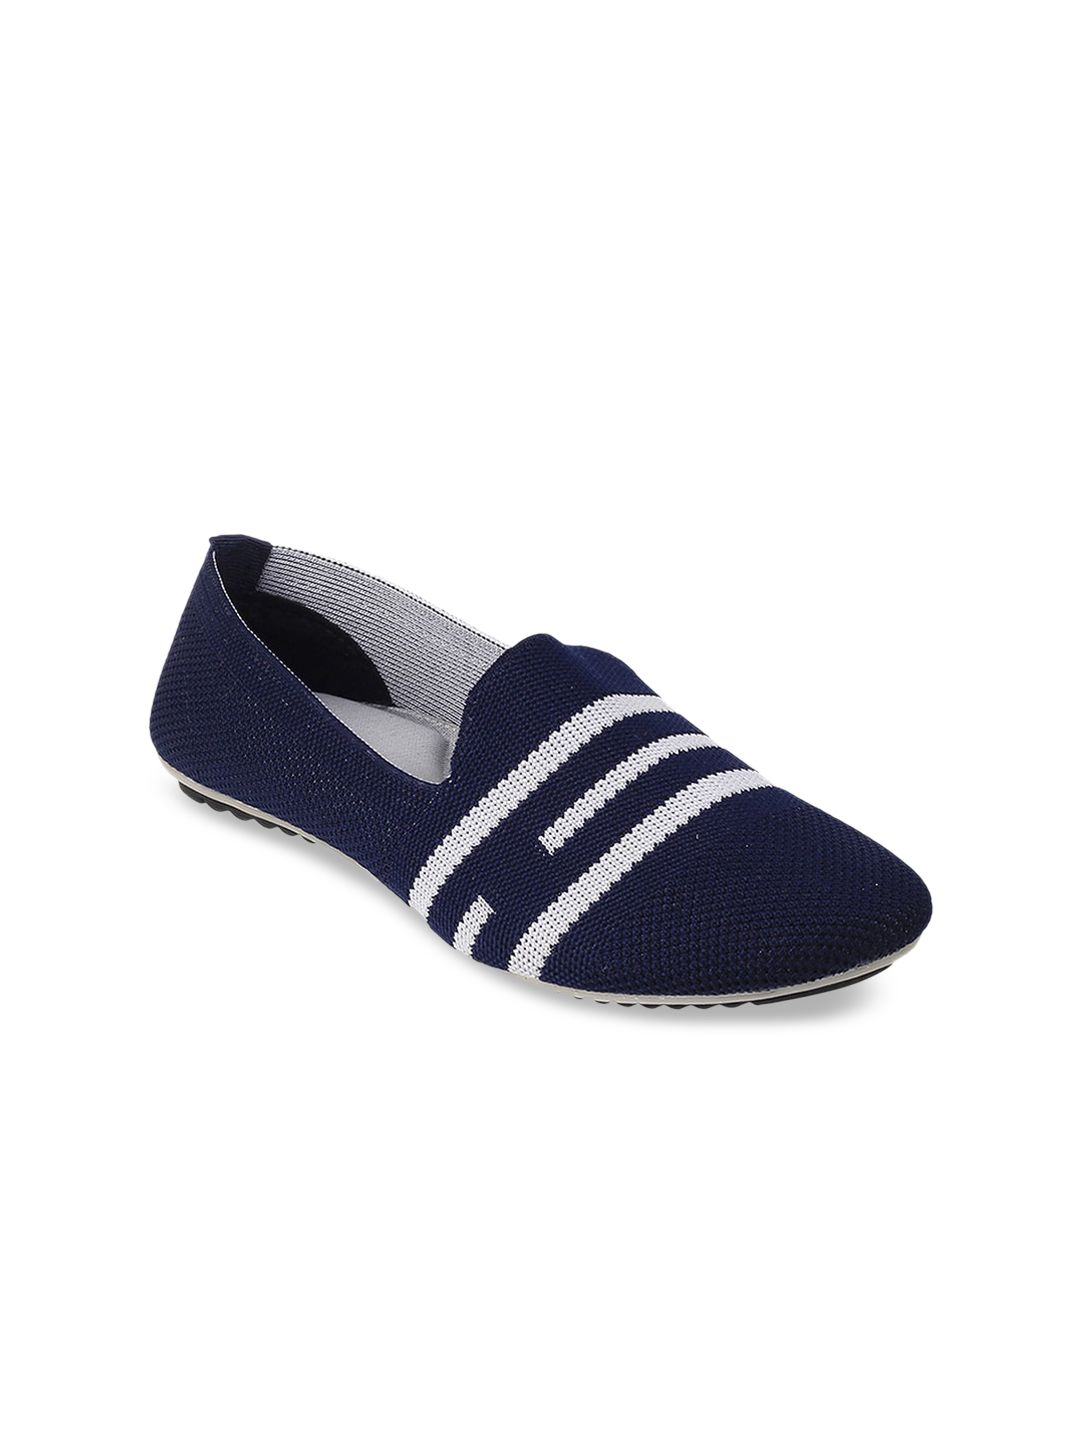 WALKWAY by Metro Women Blue Striped Loafers Price in India